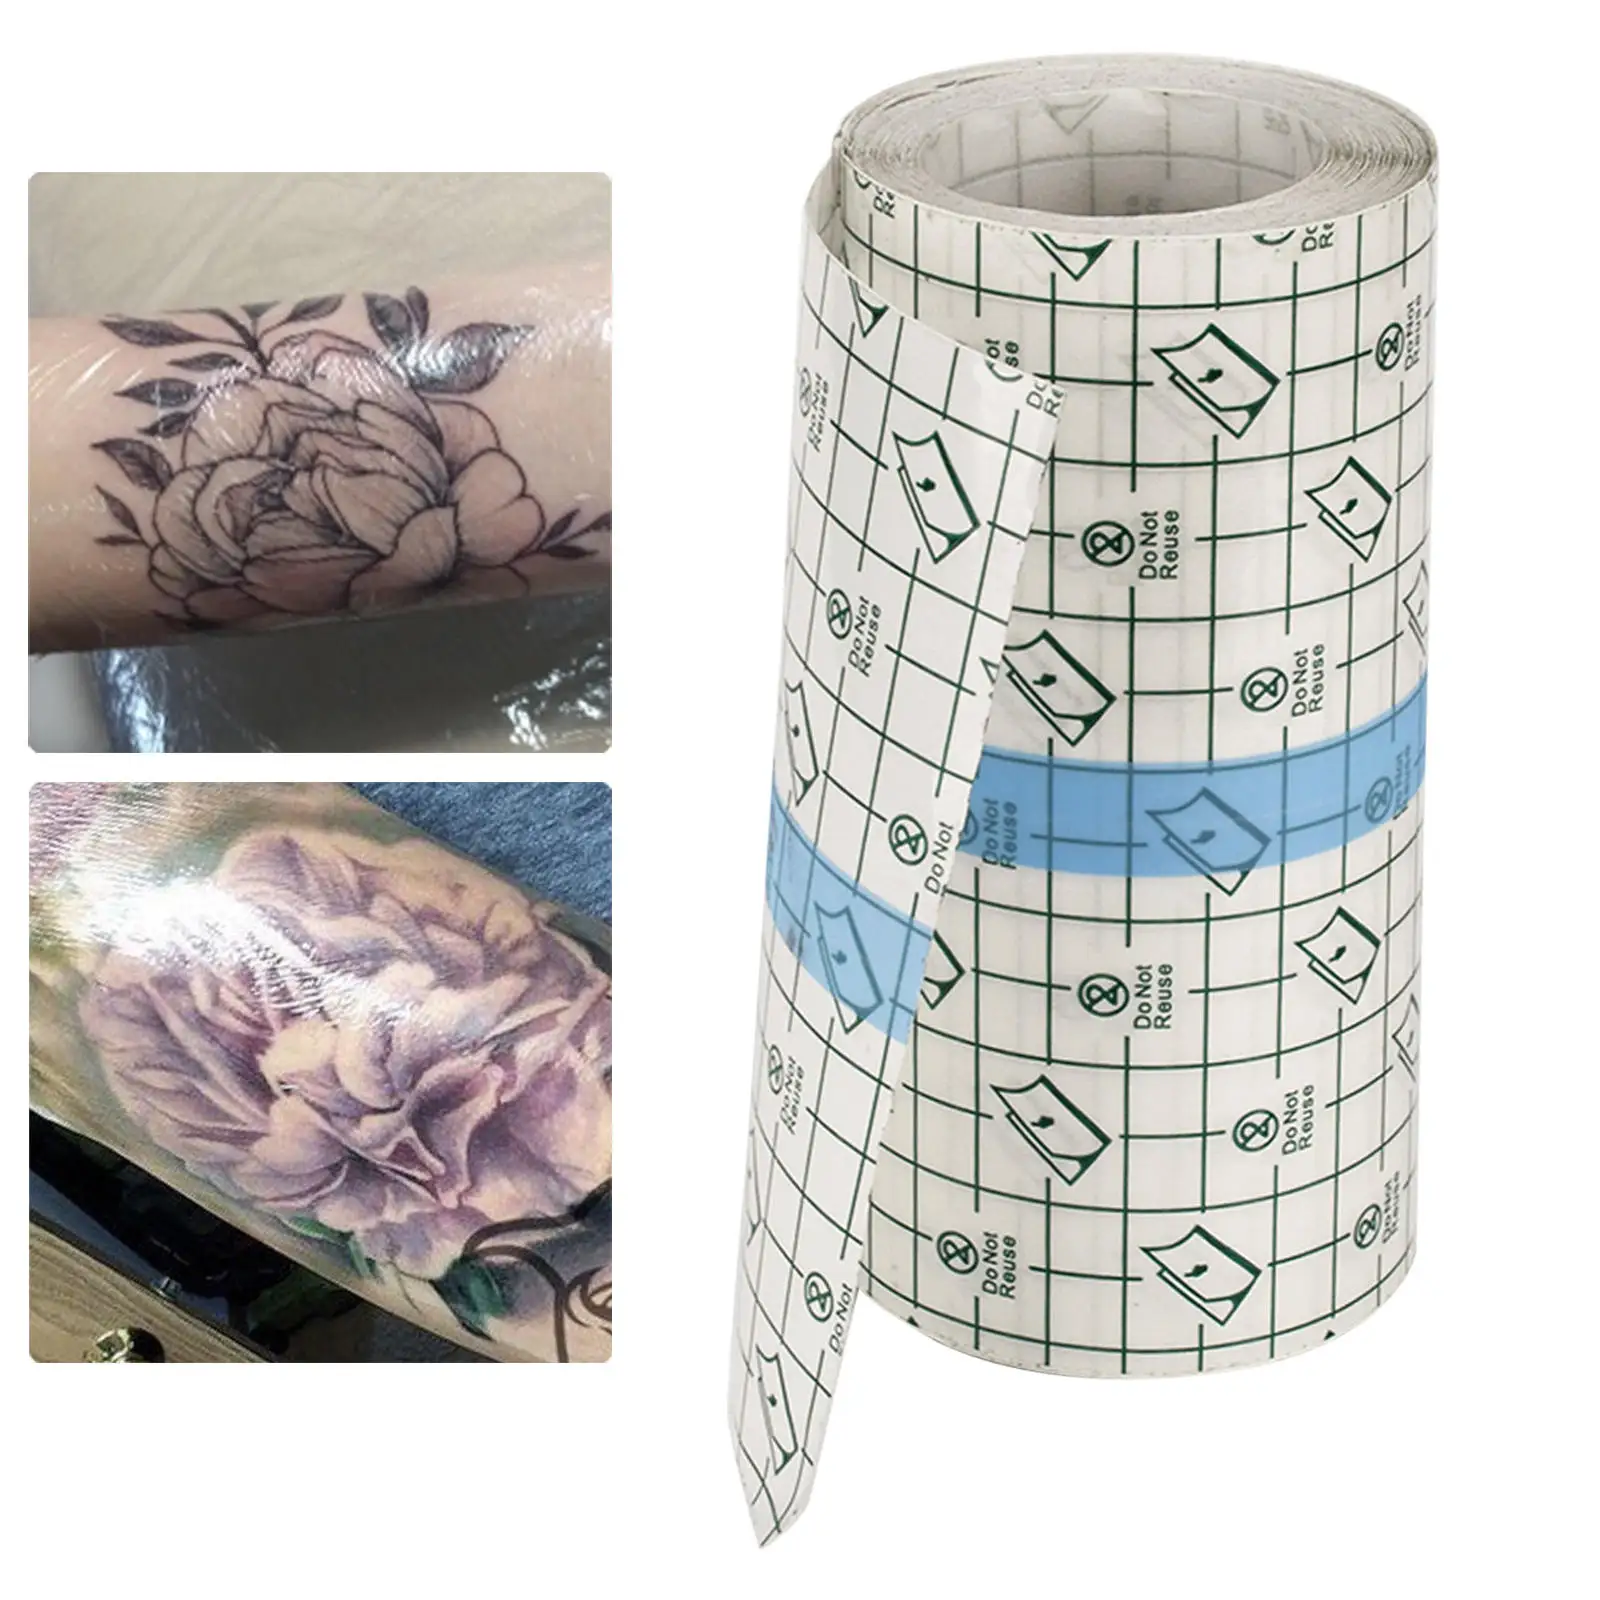 Tattoo Aftercare Bandages Roll Tattoo Film Transparent Film Tattoo Wrap Bandage Tattoo Bandage